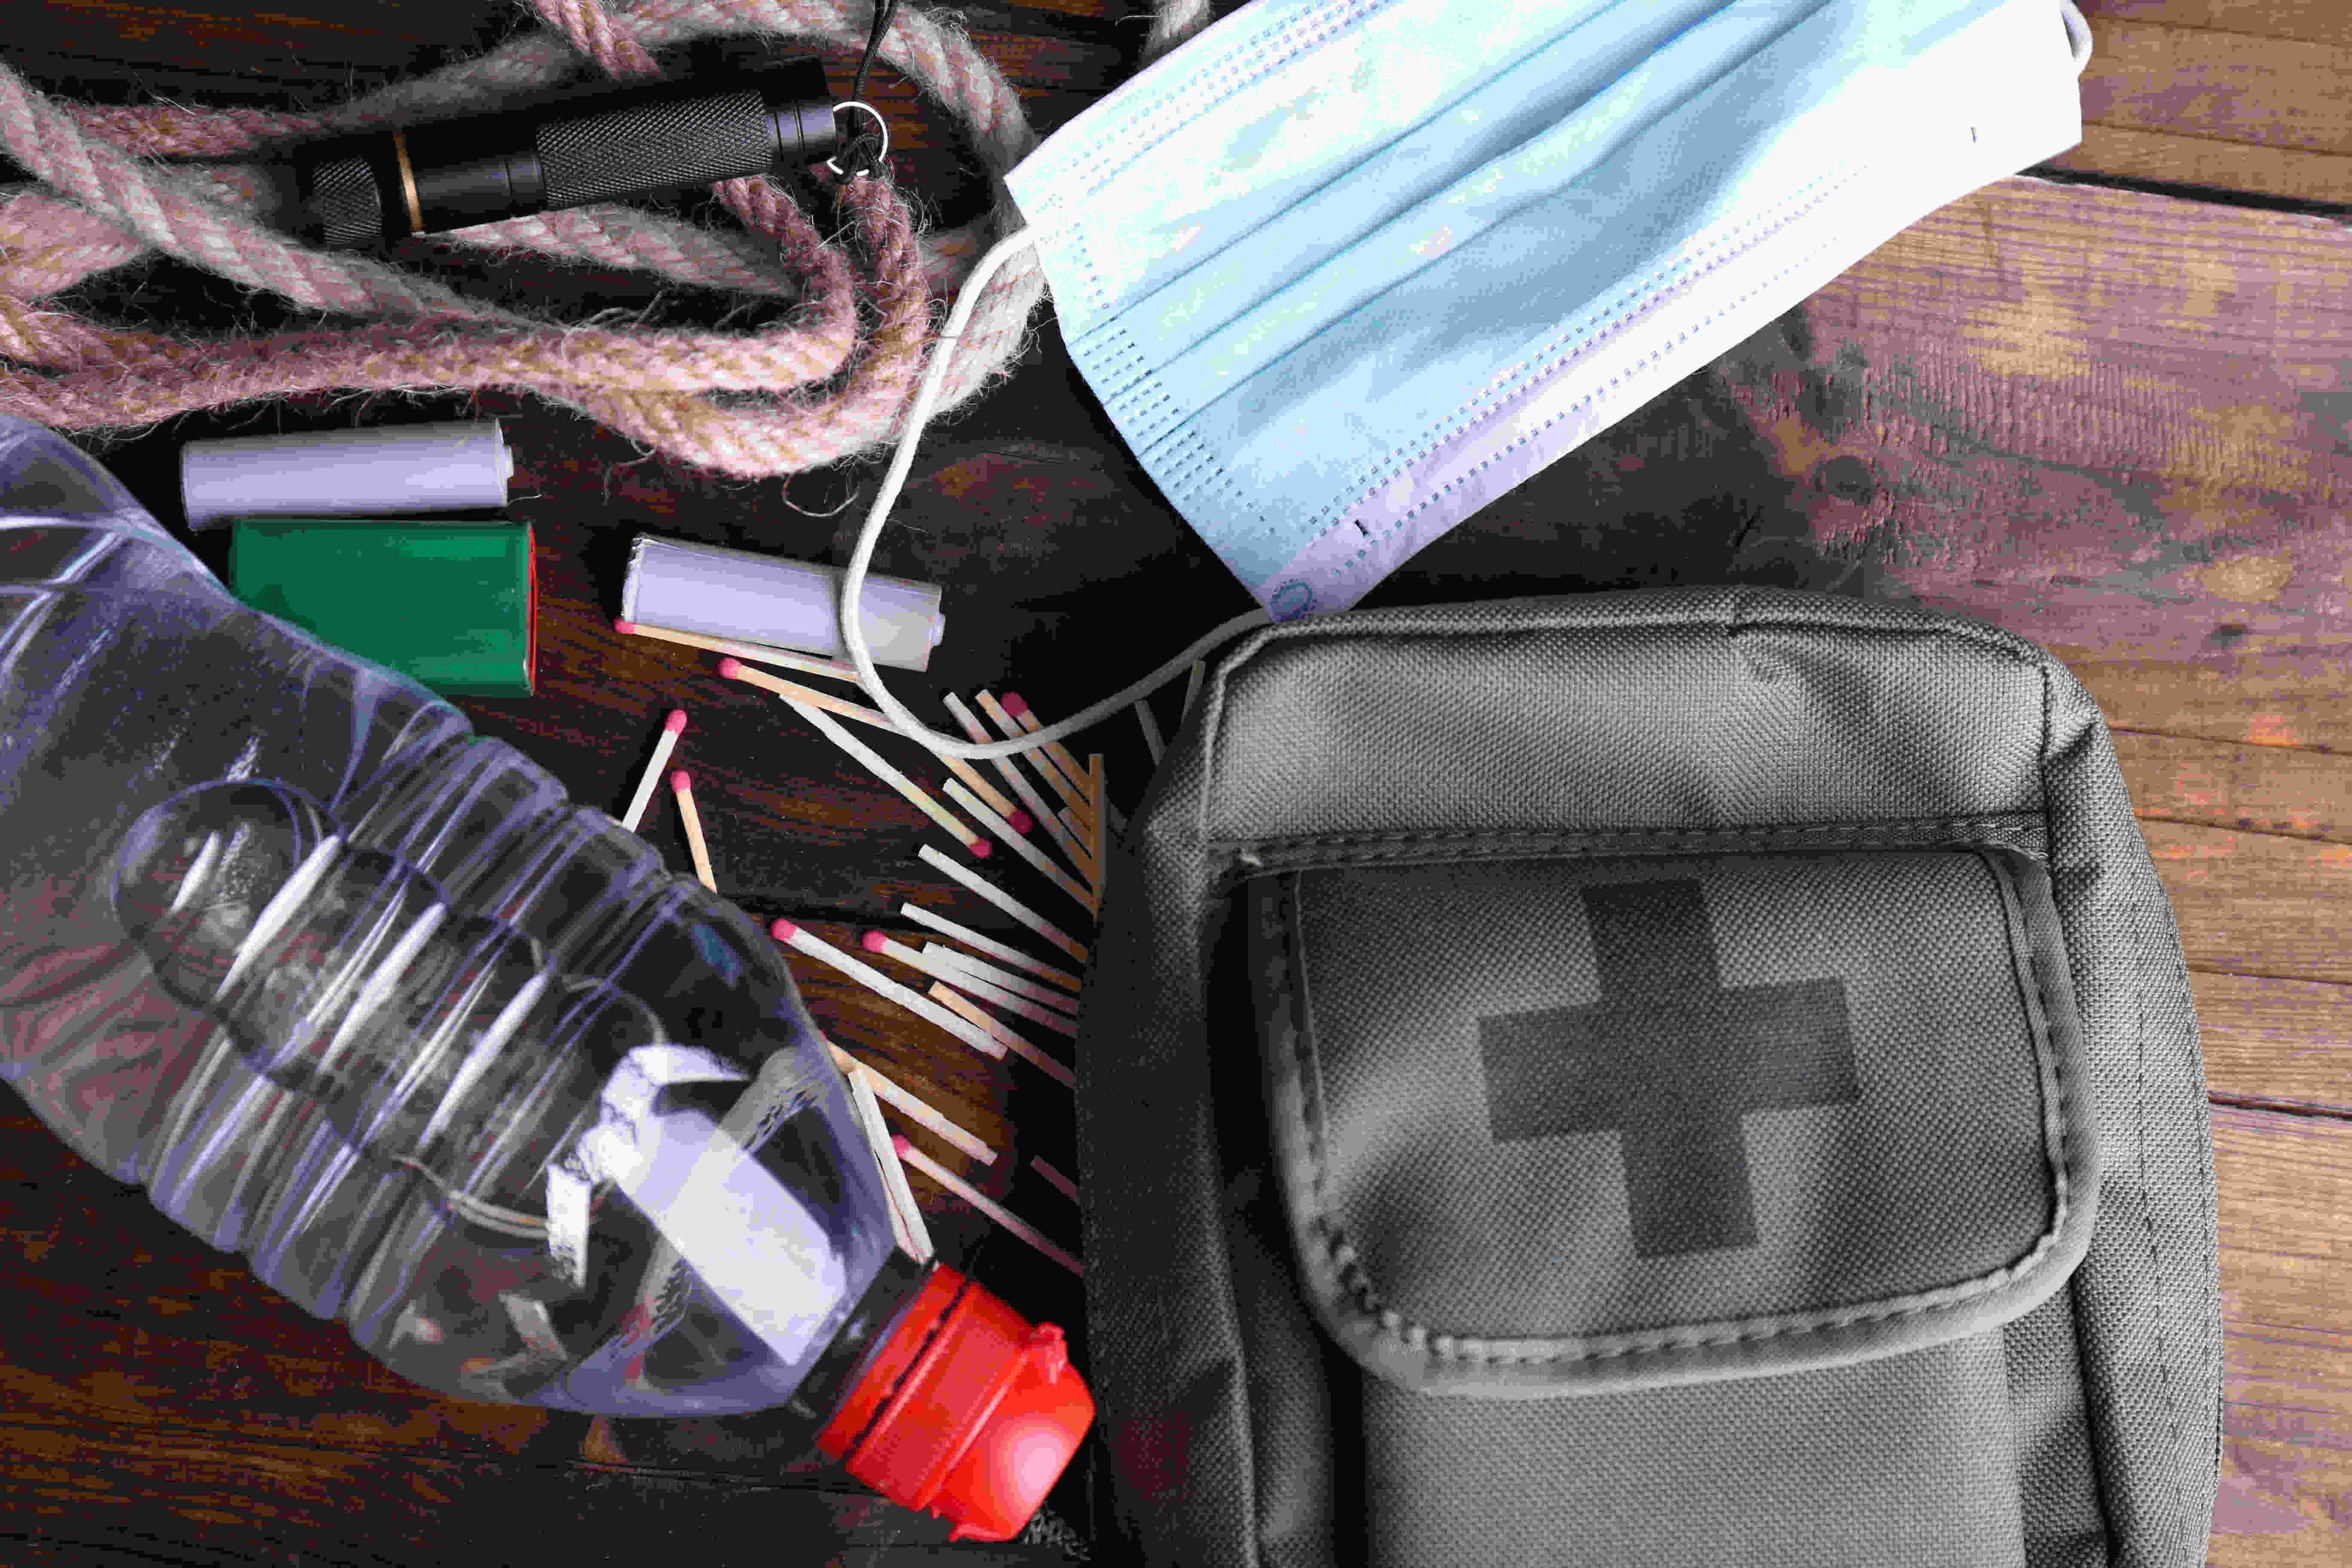 How to Make a Home Emergency Kit